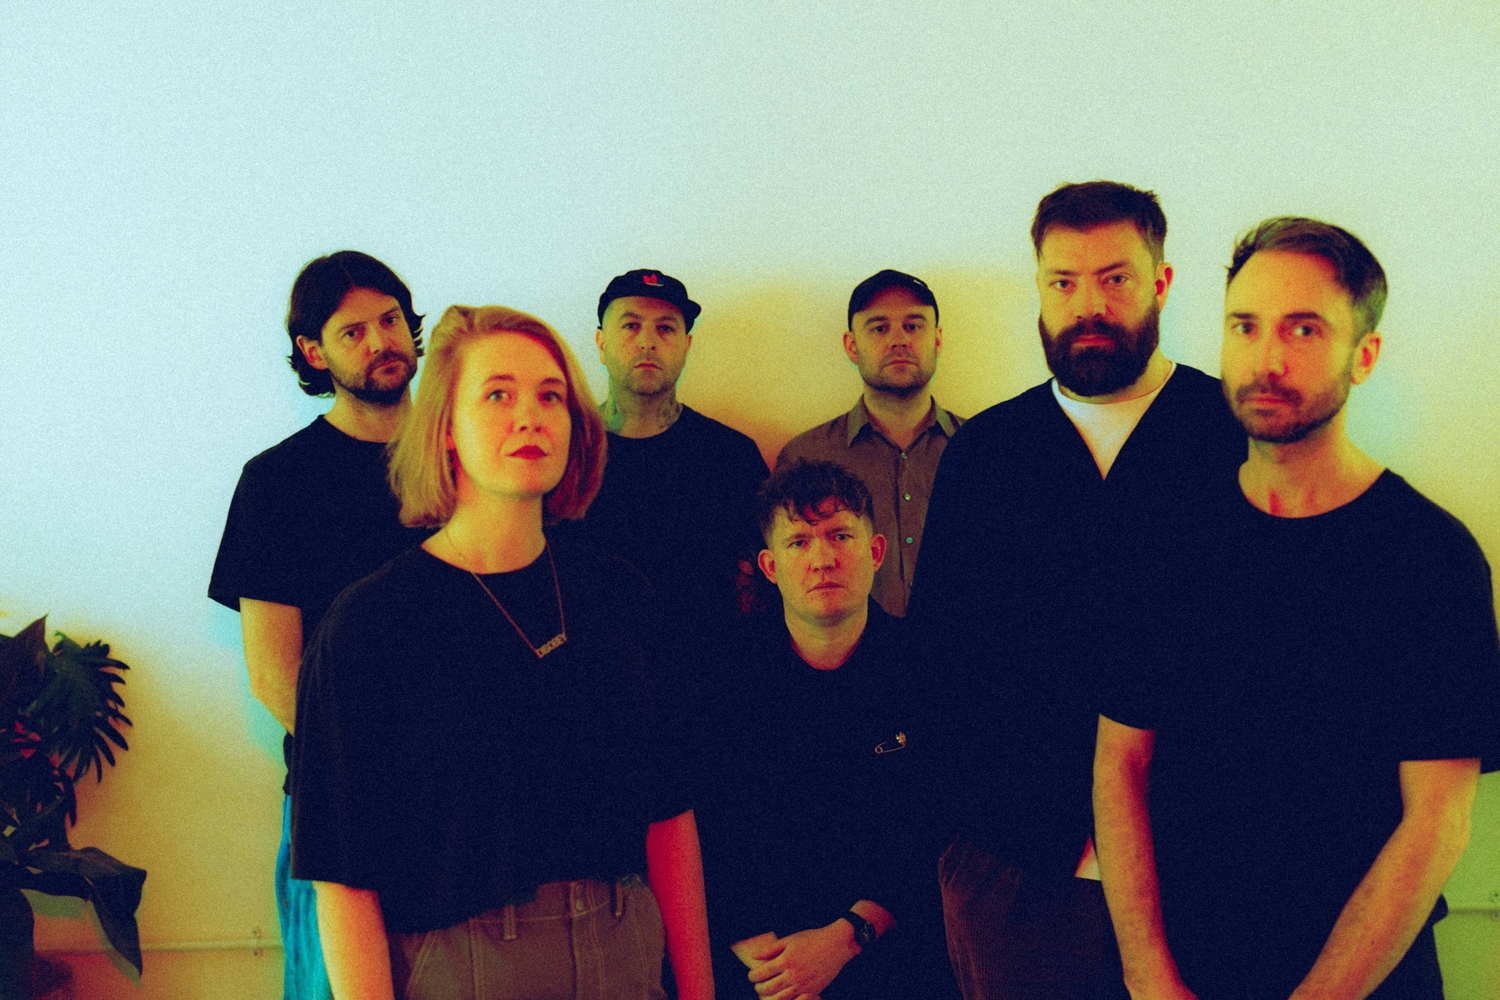 Los Campesinos! announce seventh album ‘All Hell’